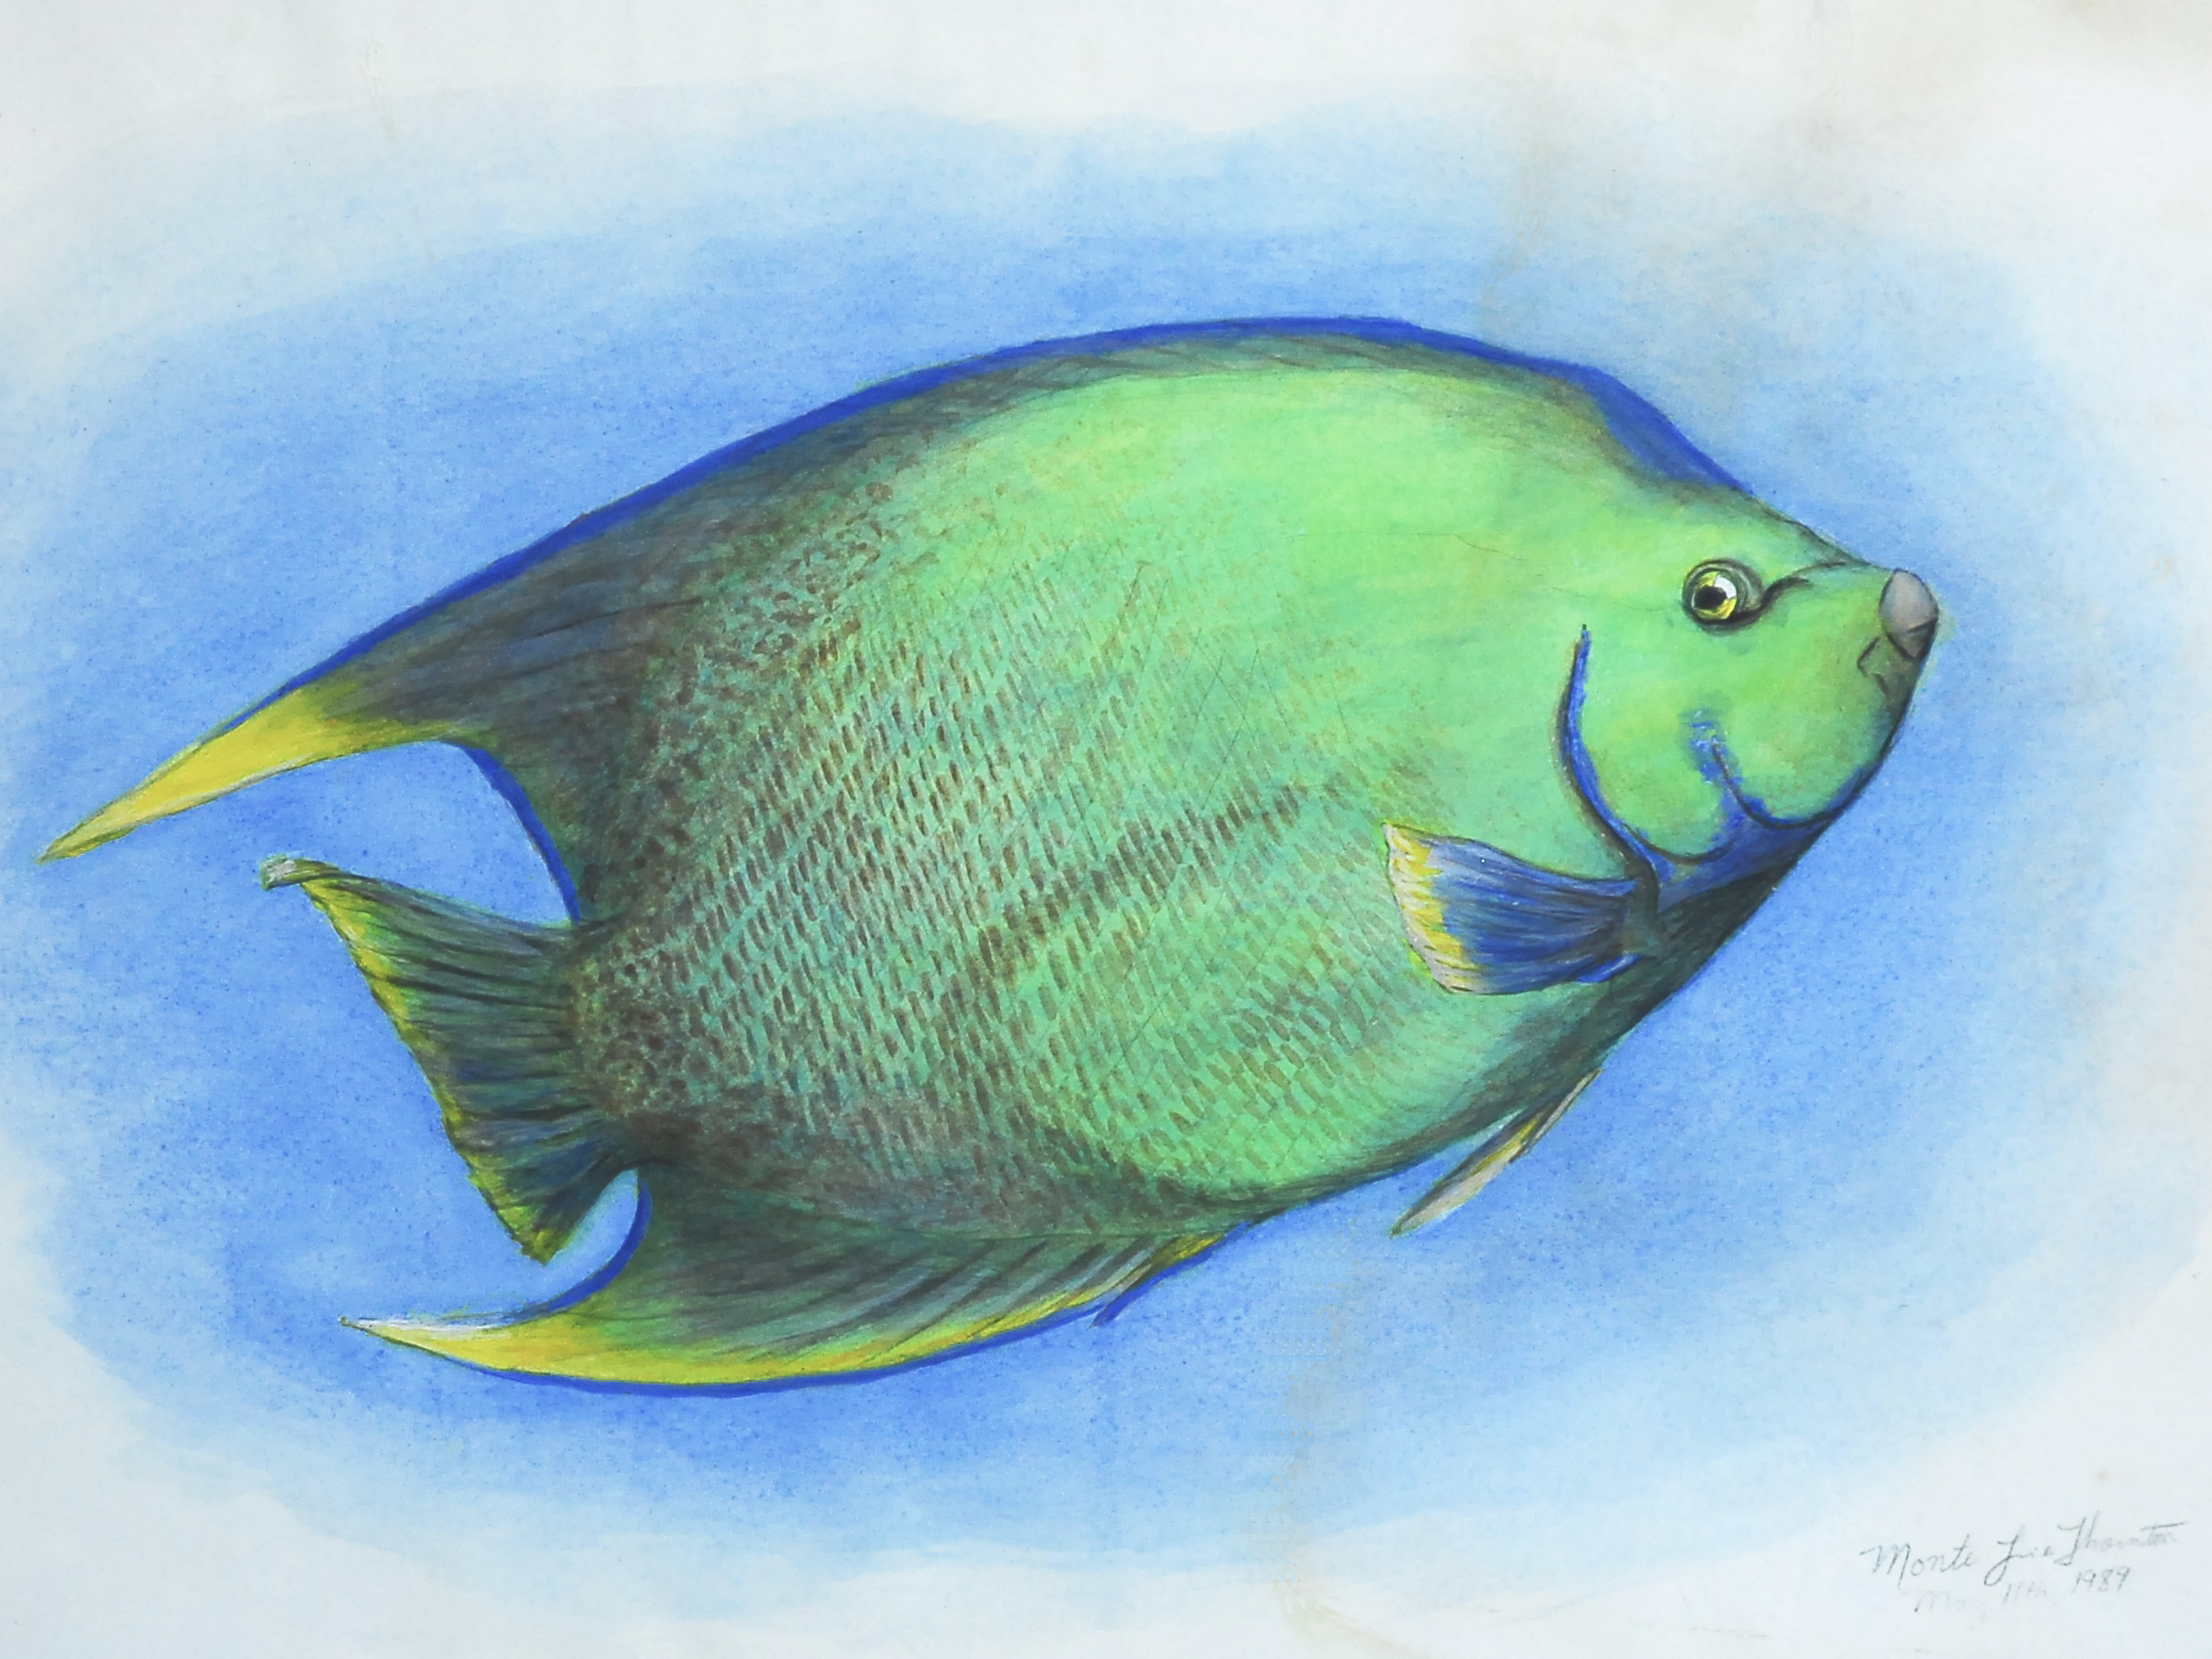 Bluegreen Angelfish series 3 of 3. Painted in 1989 by Monte Thornton.